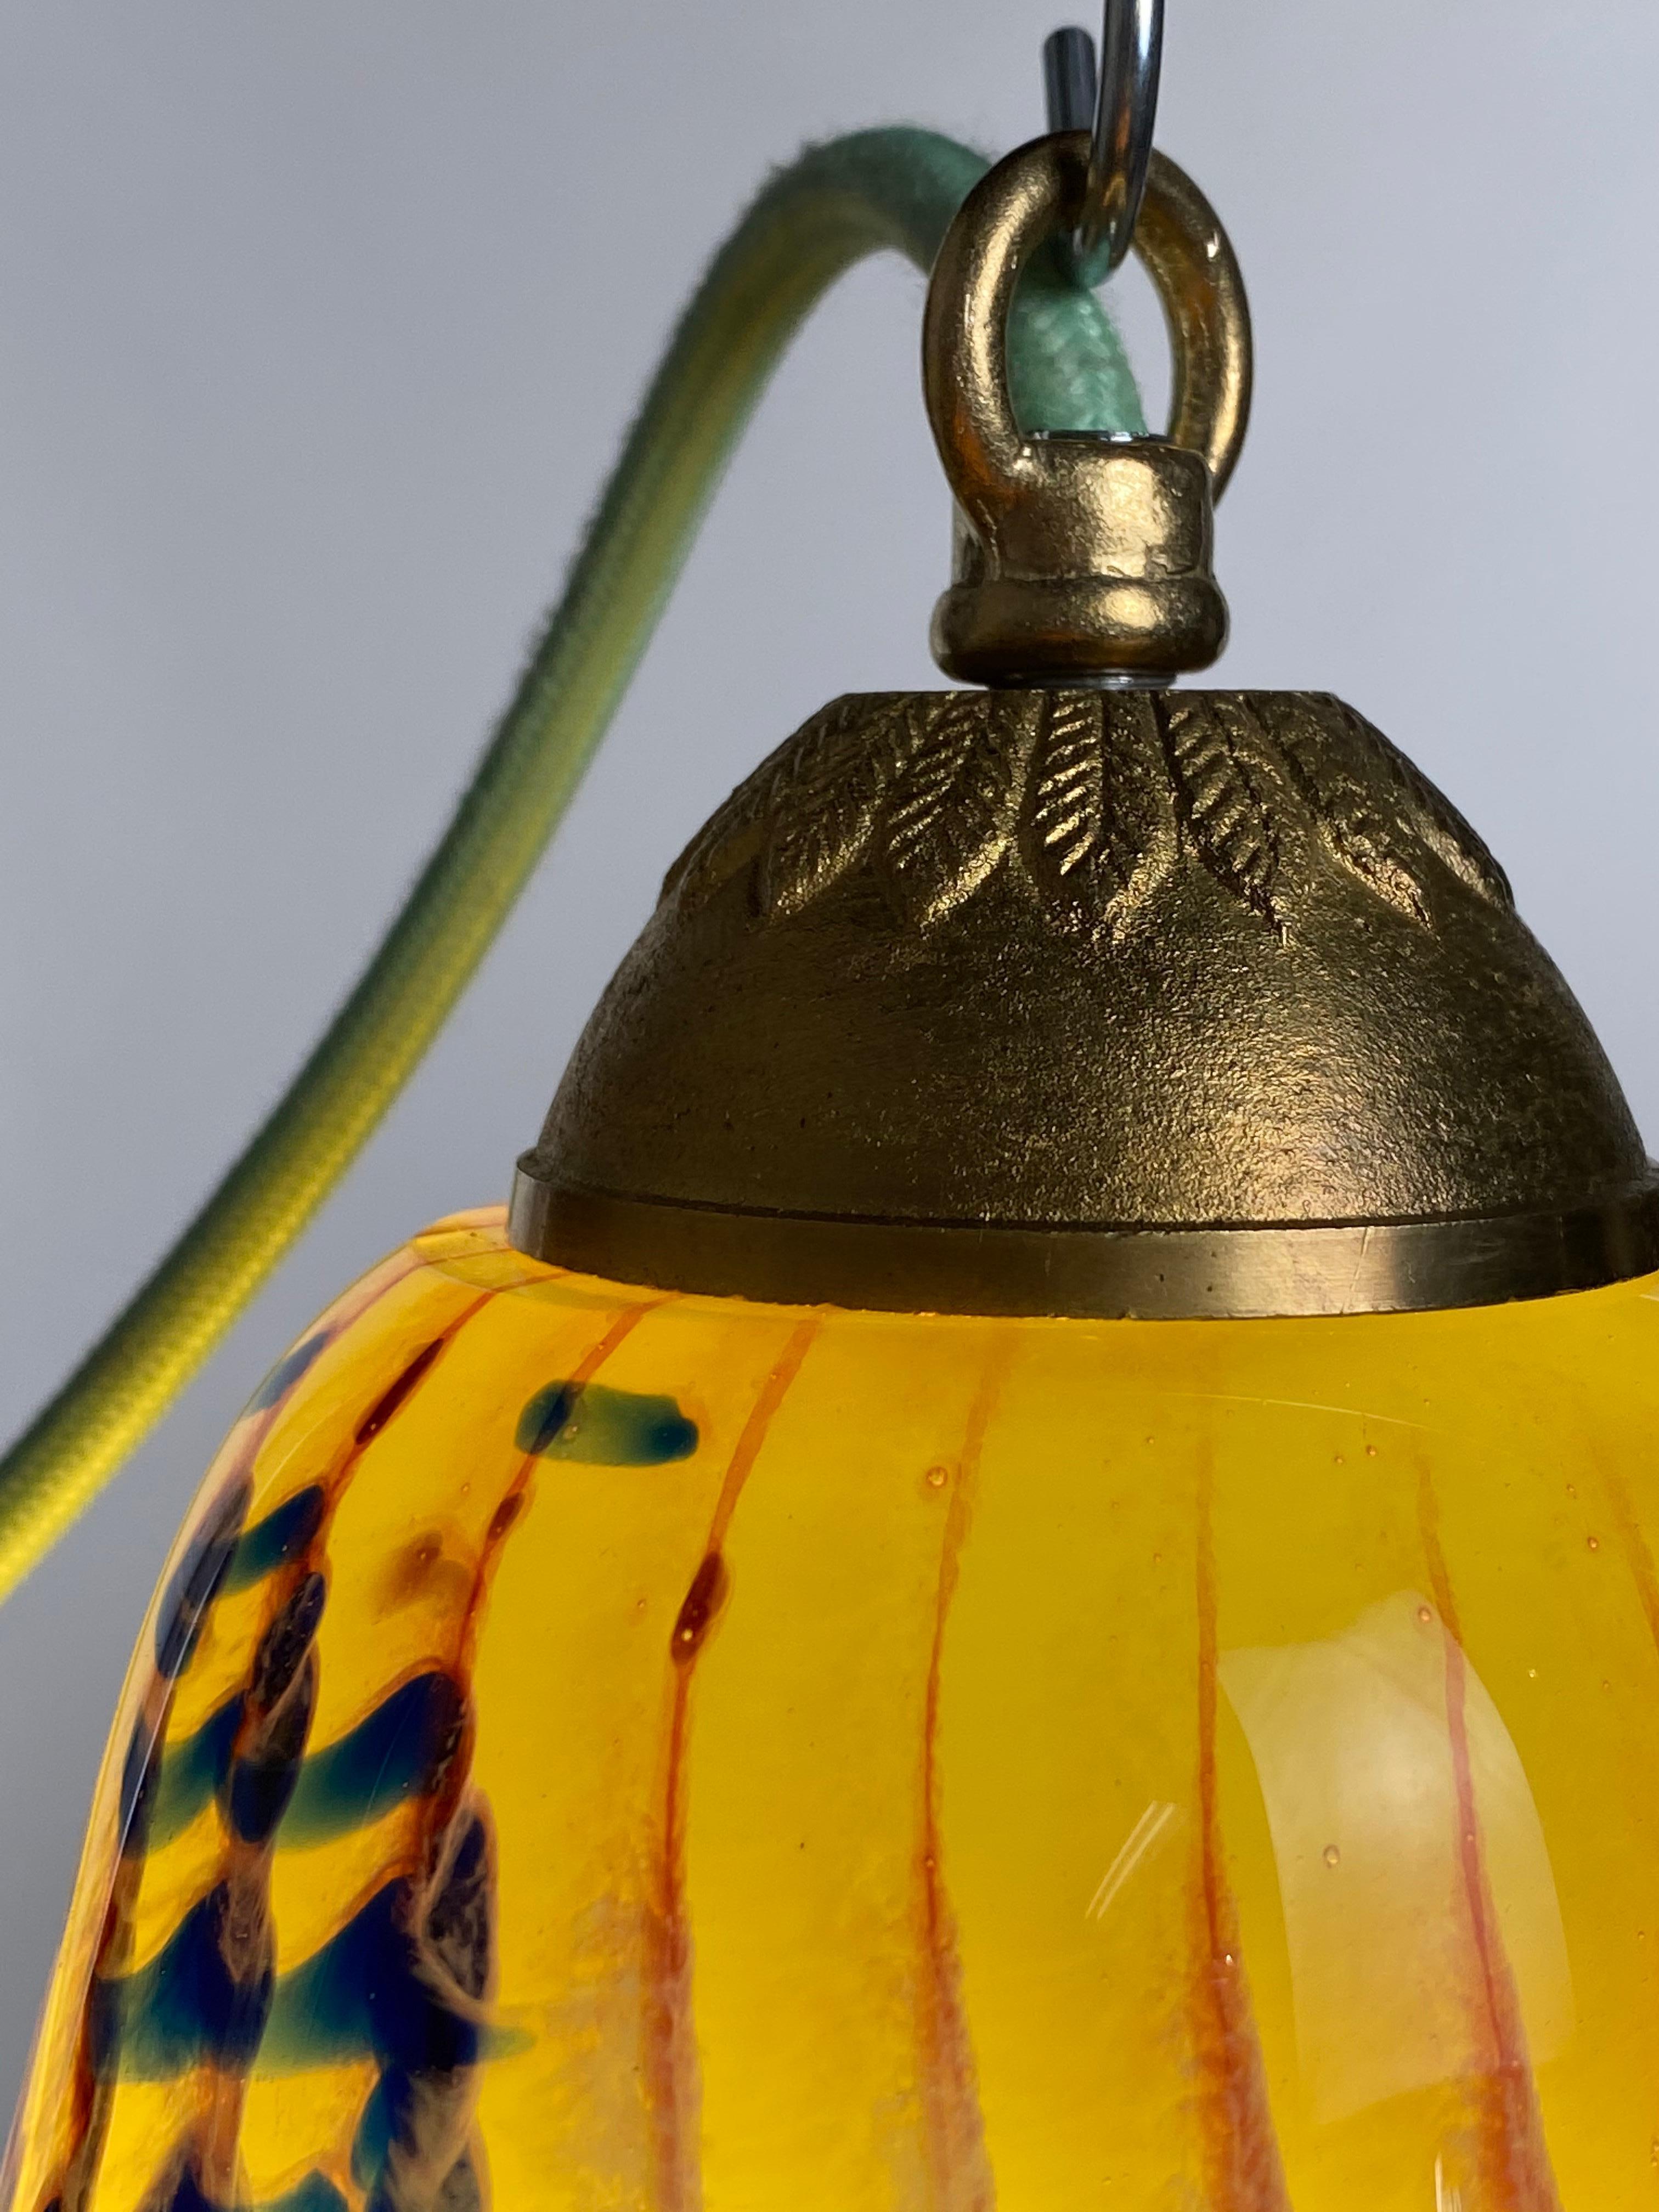 Blown Glass Yellow and Lamp Pendent Light, 21st Century by Mattia Biagi For Sale 5